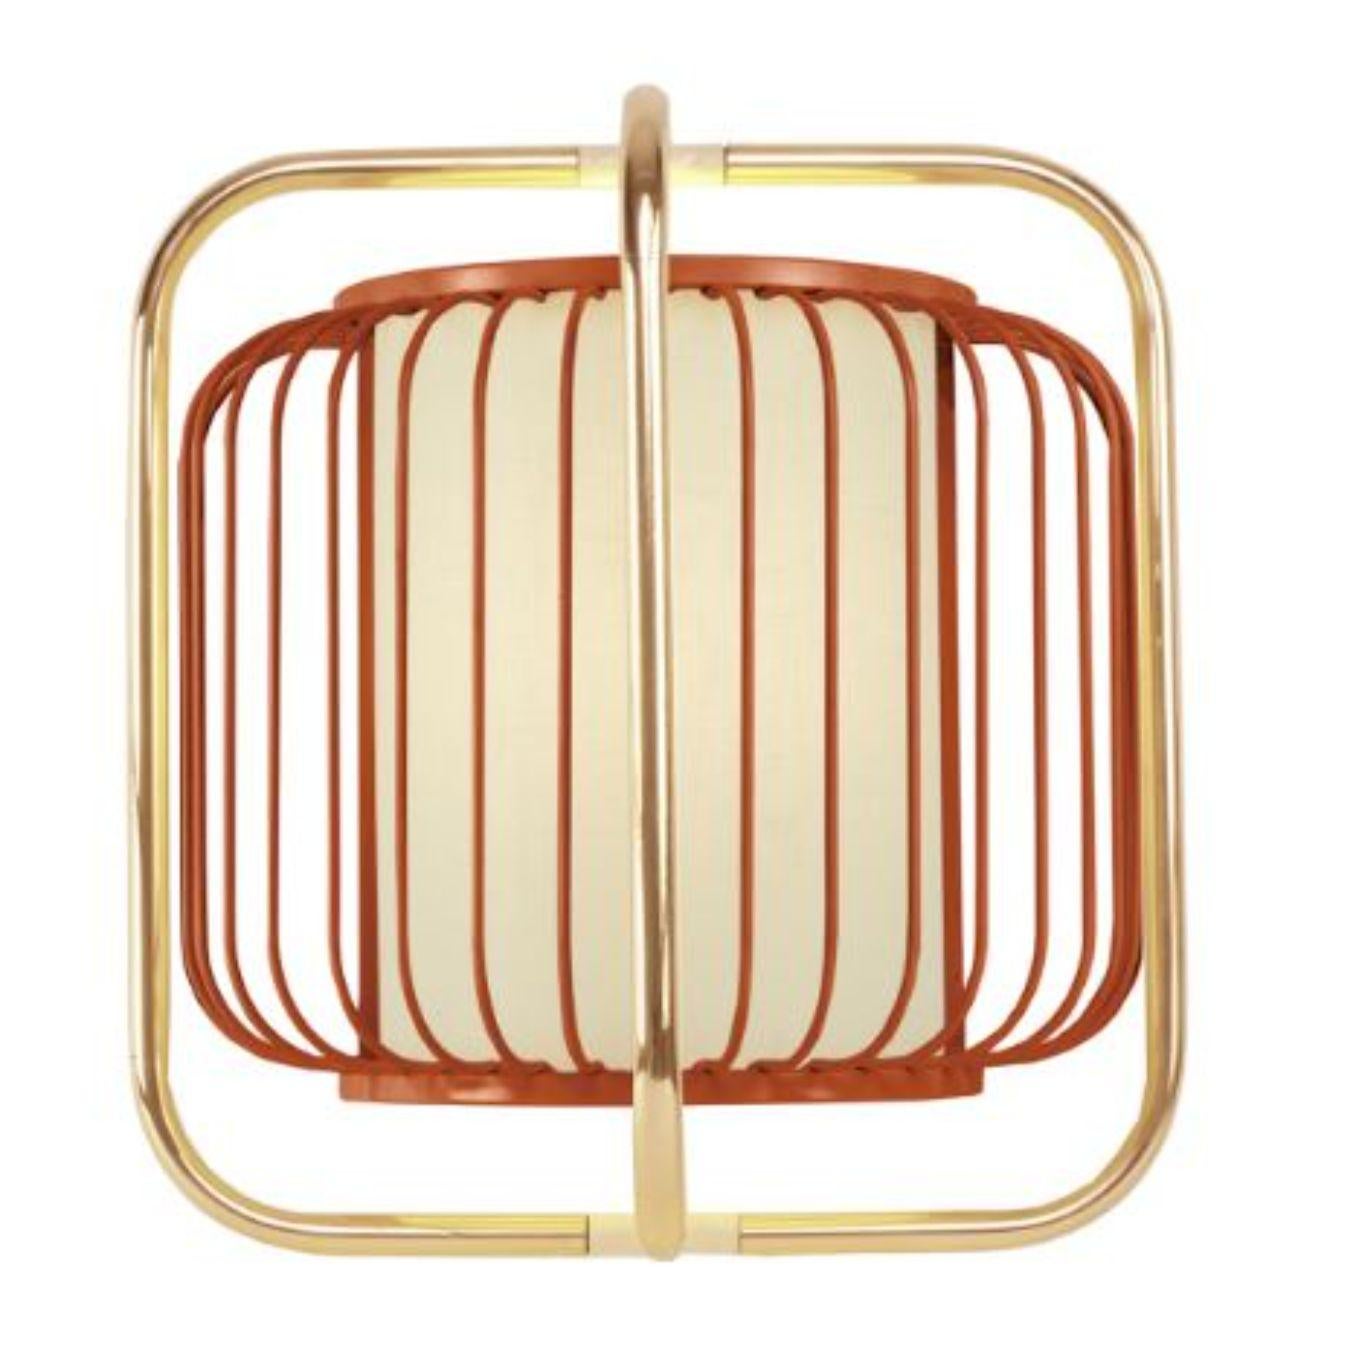 Brass and copper Jules wall lamp by Dooq
Dimensions: W 40 x D 23 x H 40 cm
Materials: lacquered metal, polished or brushed metal, brass.
abat-jour: cotton
Also available in different colors and materials.

Information:
230V/50Hz
E14/1x15W